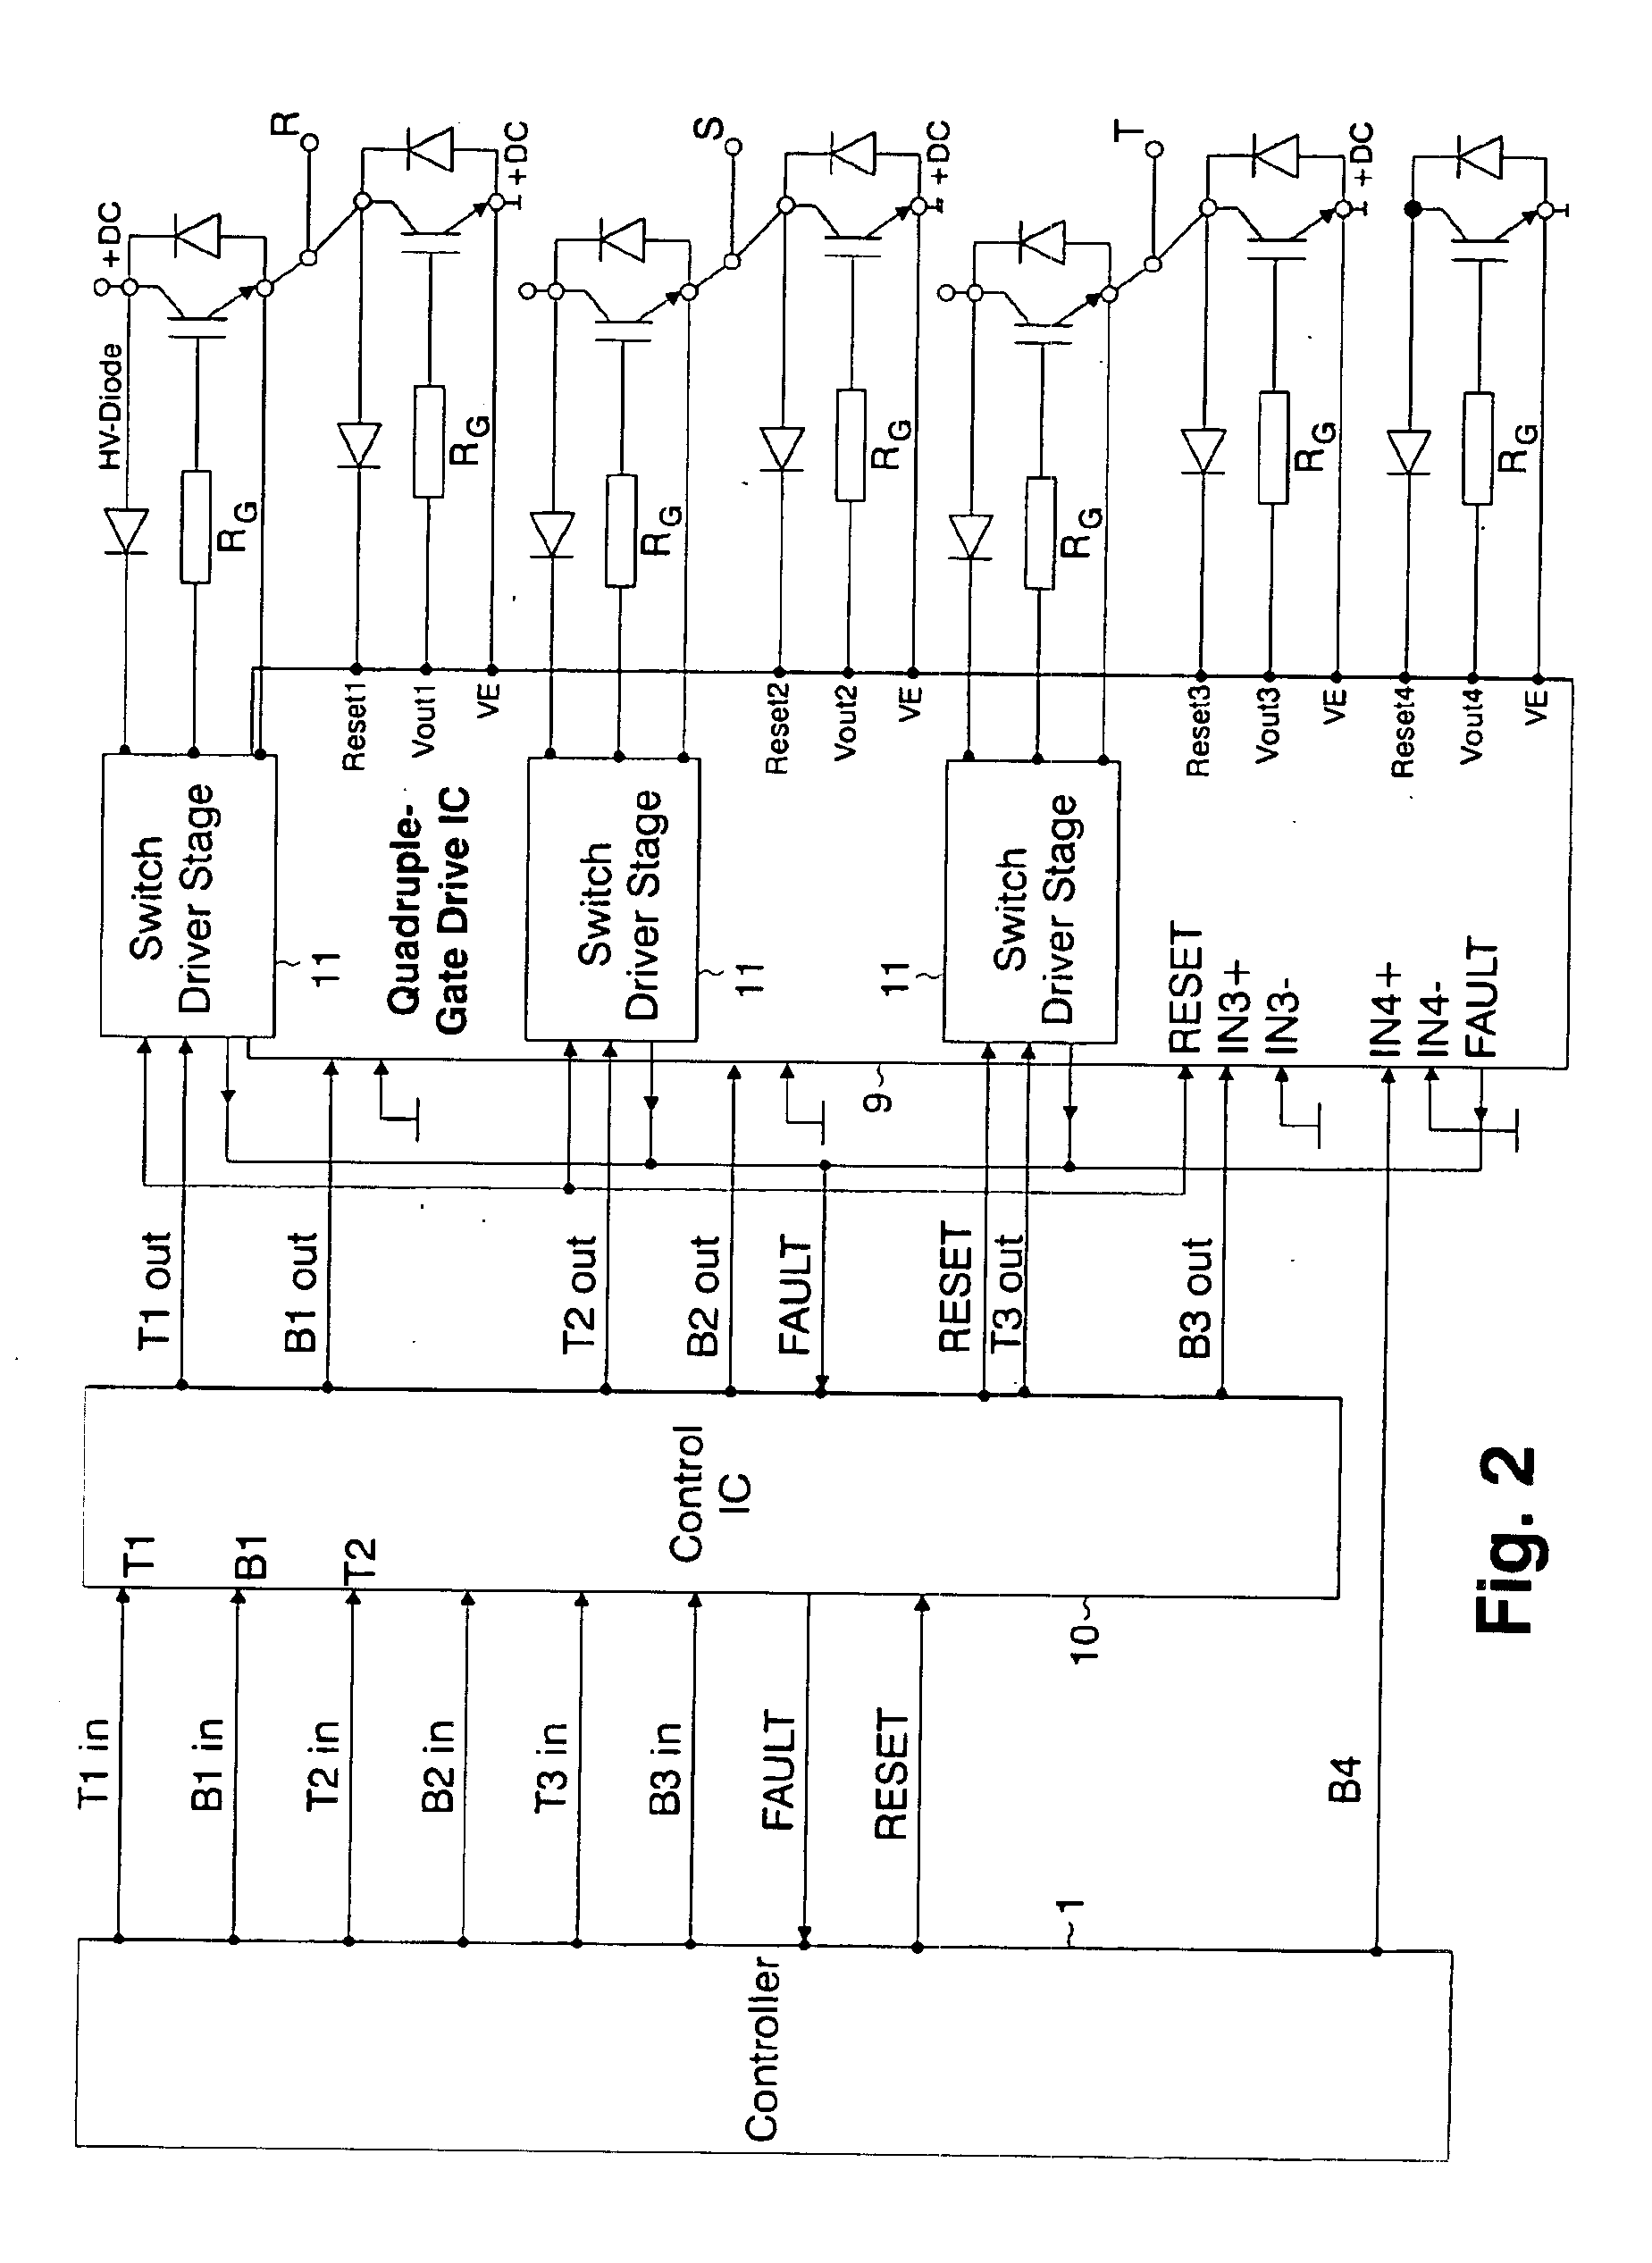 Semiconductor component for controlling power semiconductor switches